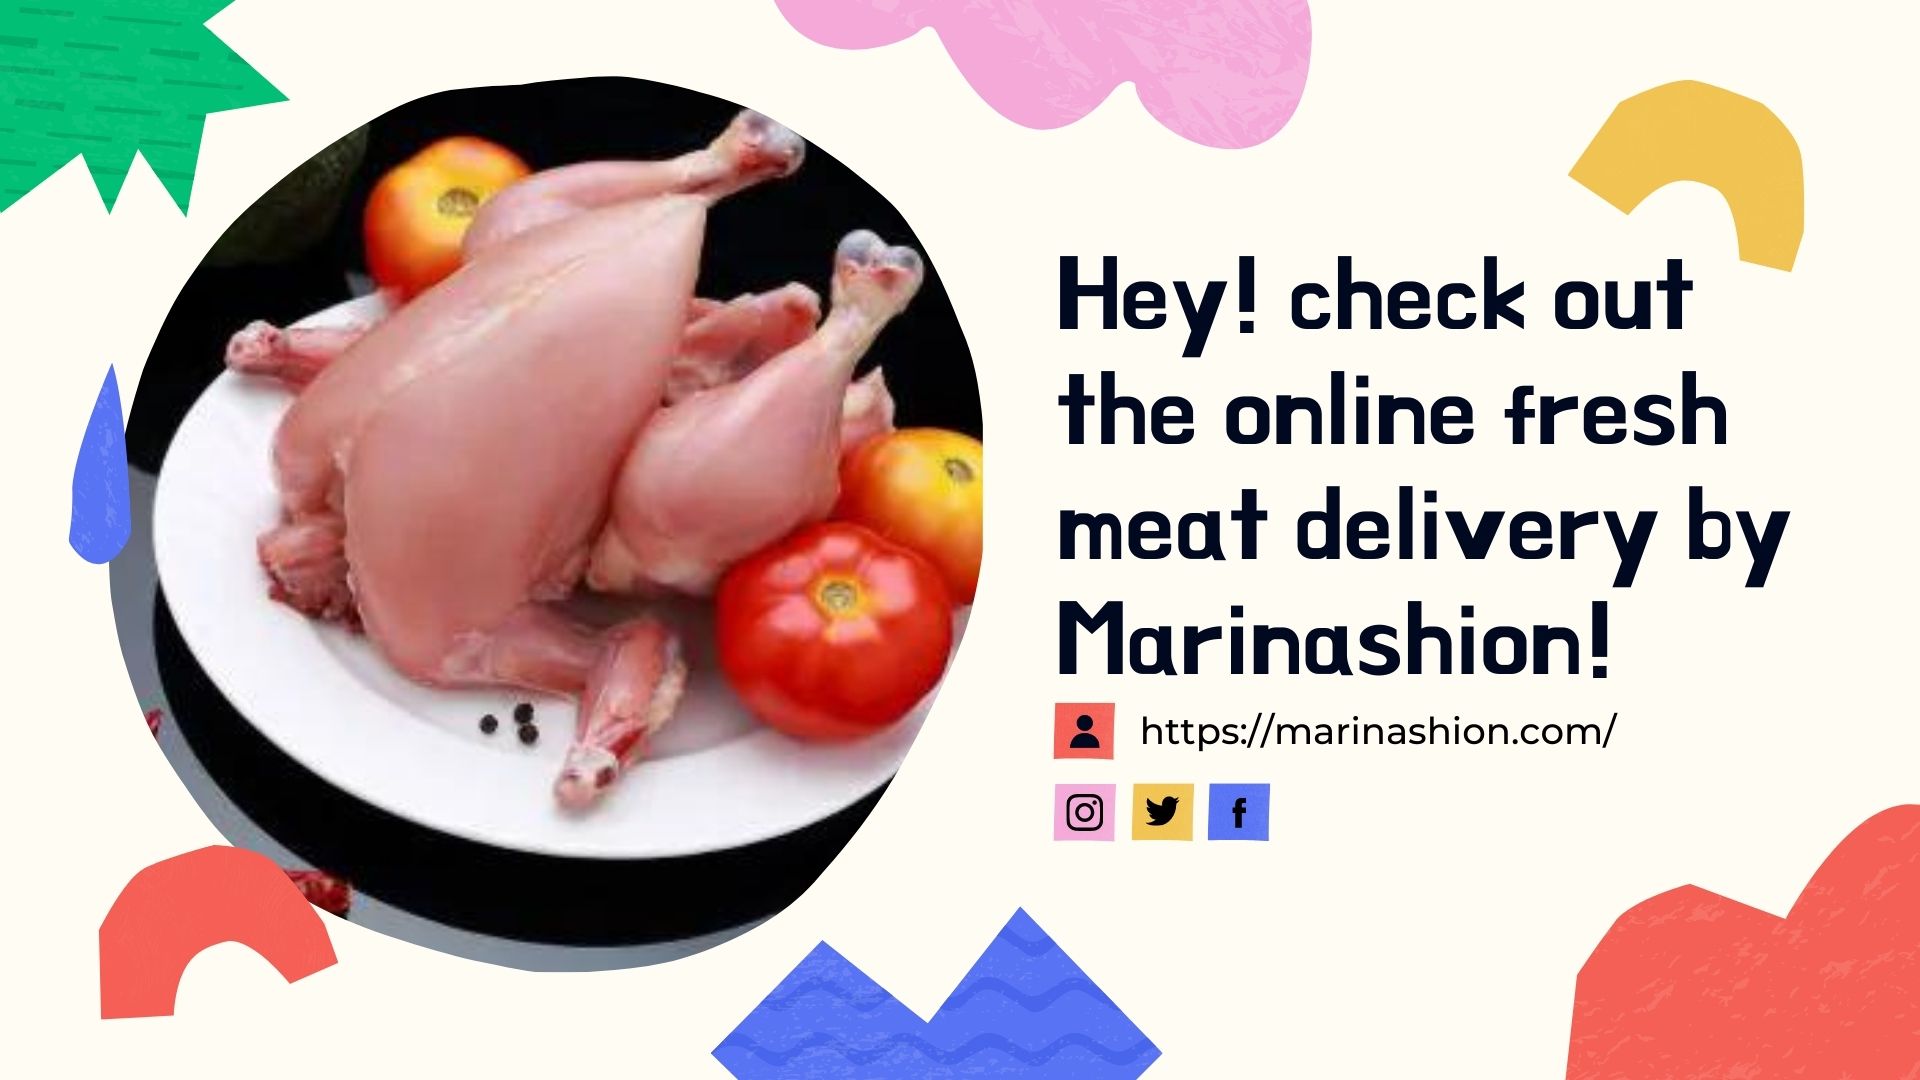 Marinashion is an online fresh meat delivery service that brings the fresh and top notch quality of meat to your doorstep. Just visit the Marinashion website and order your favourite high quality checken today.
https://marinashion.com/